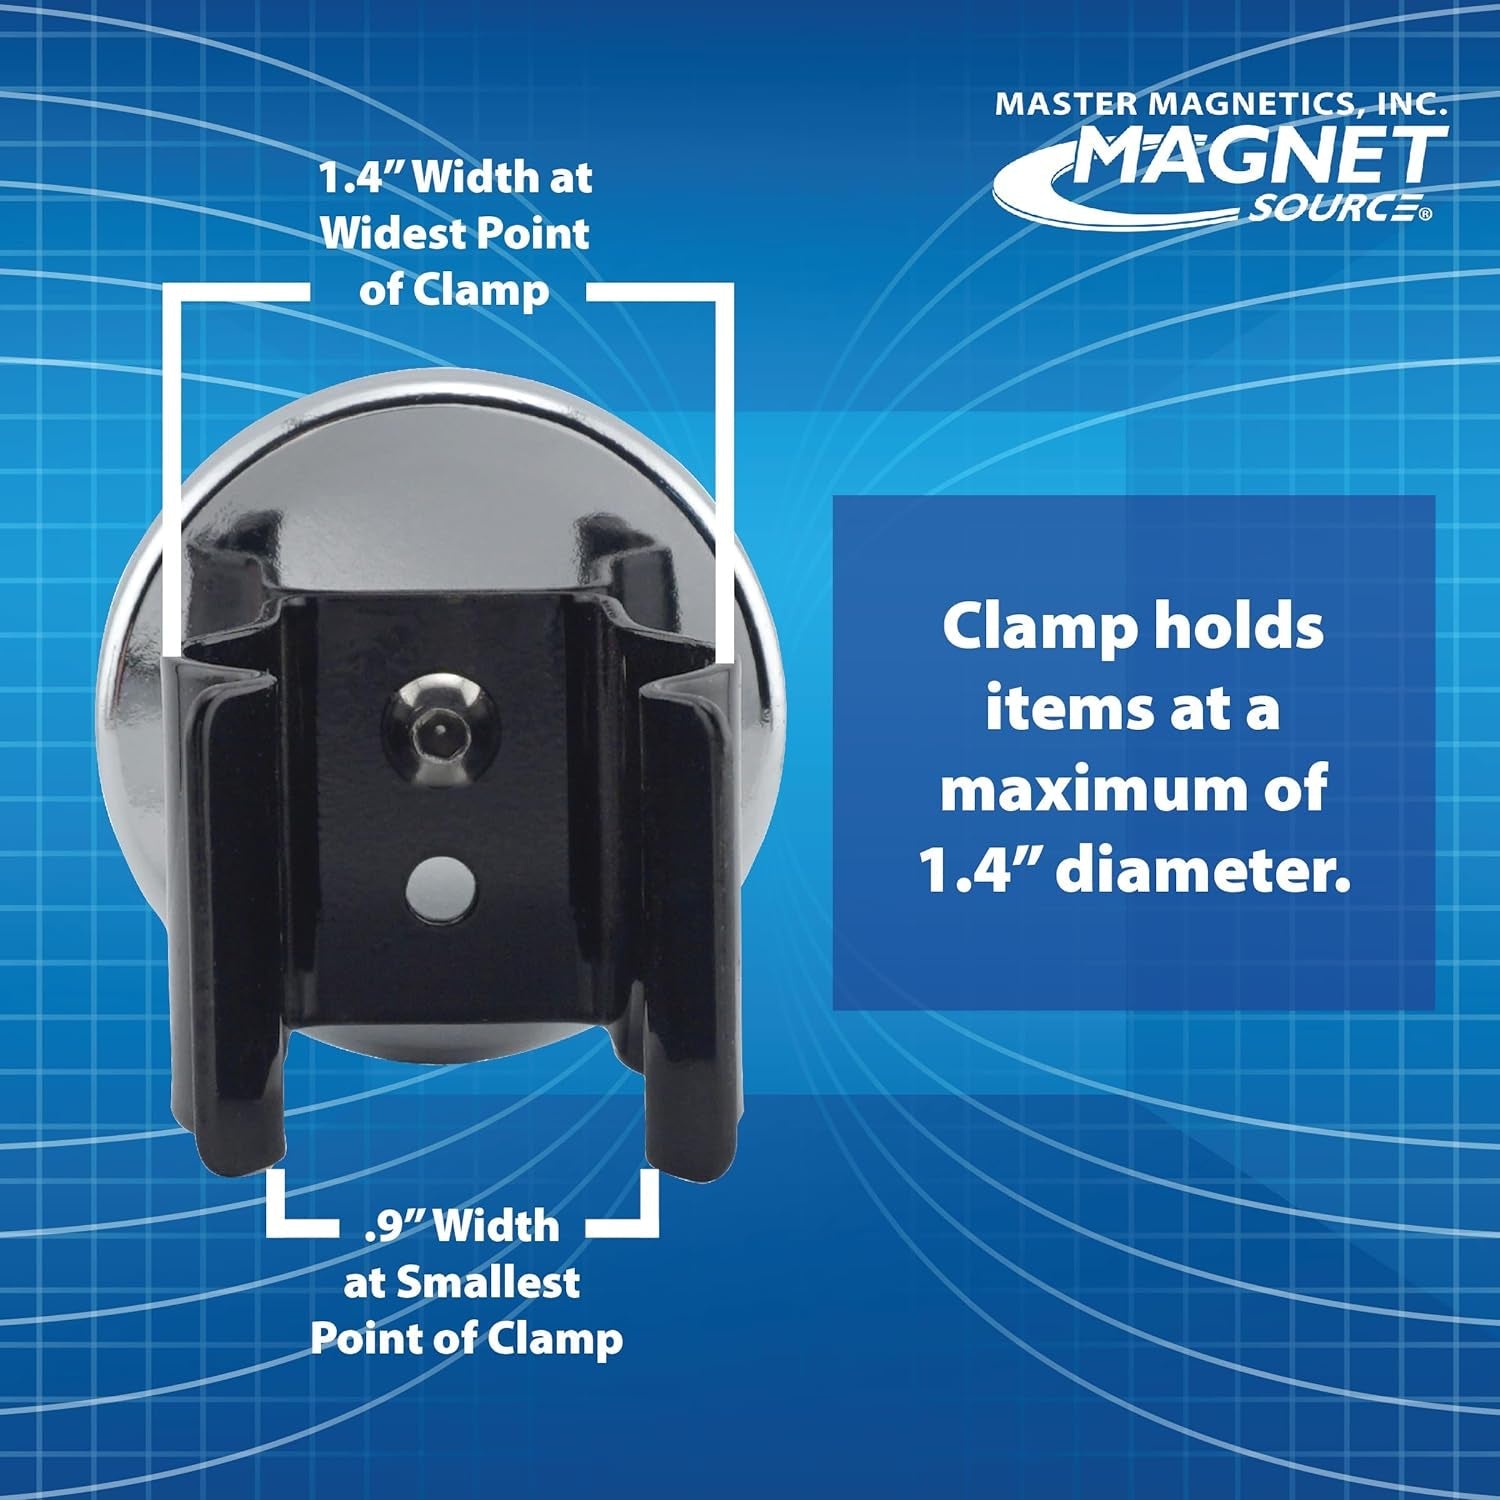 Master Magnetics Ceramic round Base Magnet with Black Spring Clamp - 2.04" Diameter, 2.210" Total Height, Nickel Plated, Pack of 2, RB50NPCX2